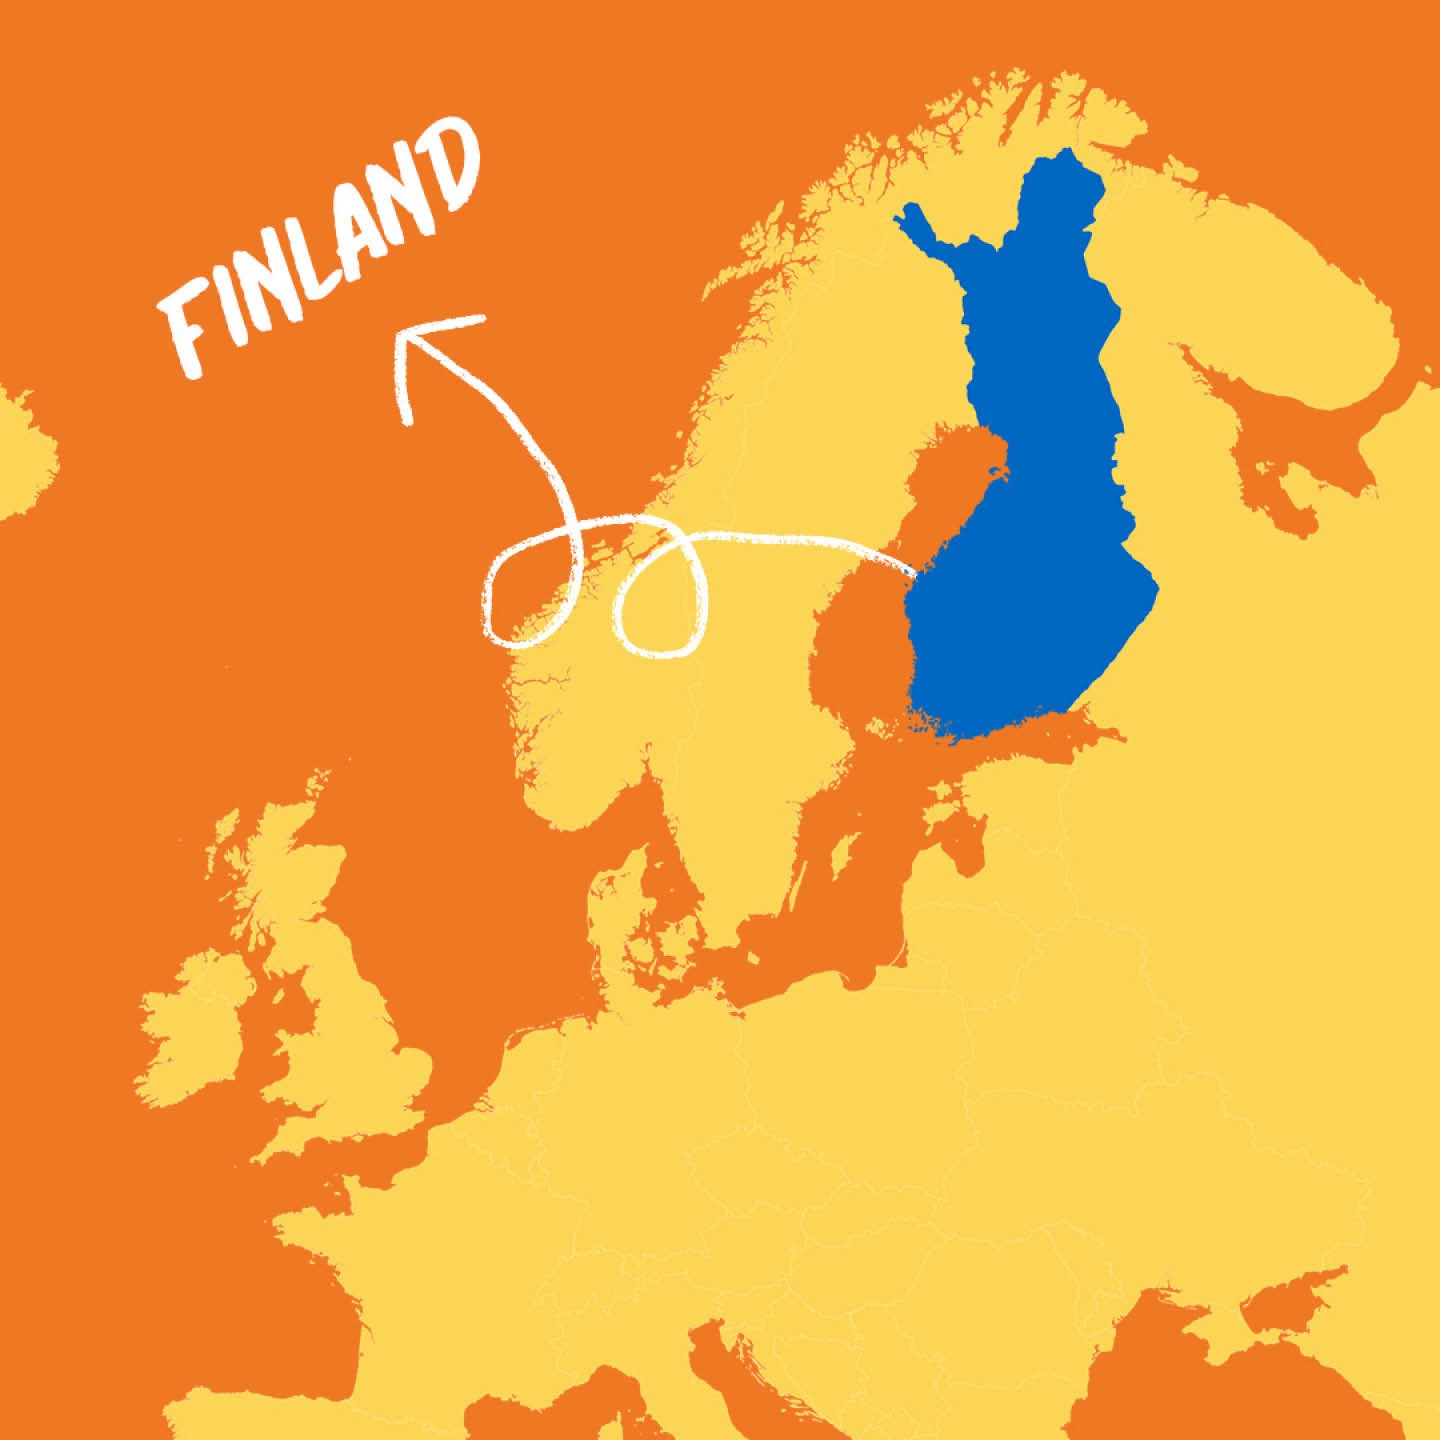 Orange and yellow map depicting the northern part of Europe. The whole of Finland is highlighted in blue. A hand-drawn arrow points to it and leads to white text that says Finland.